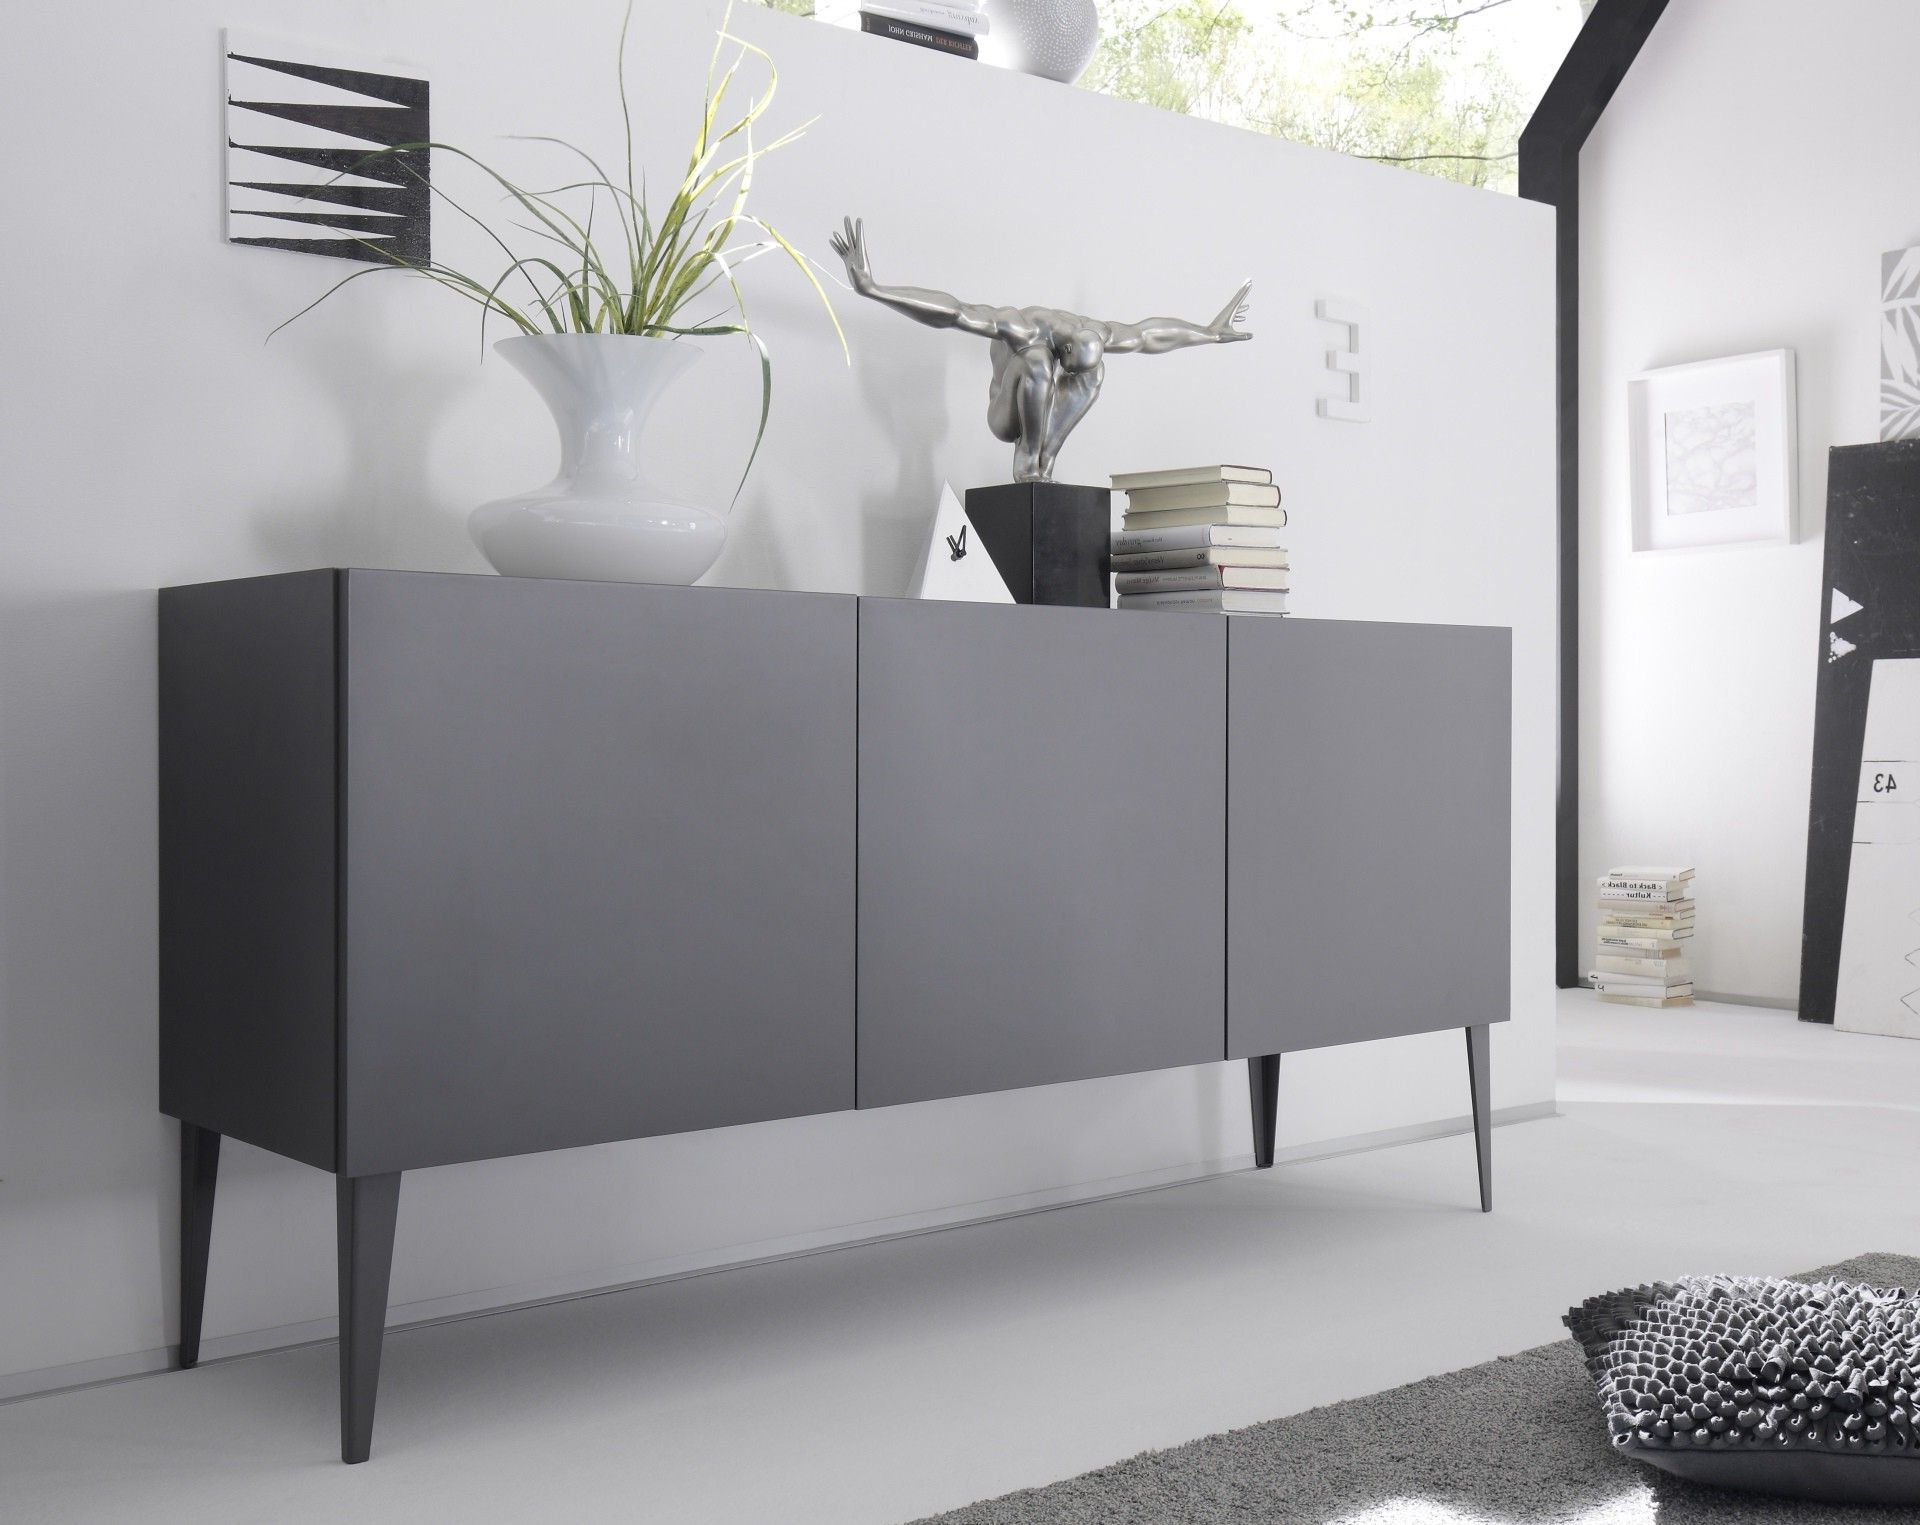 Livia – Grey Or White Matt Lacquered Sideboard Intended For White And Grey Sideboards (View 1 of 20)